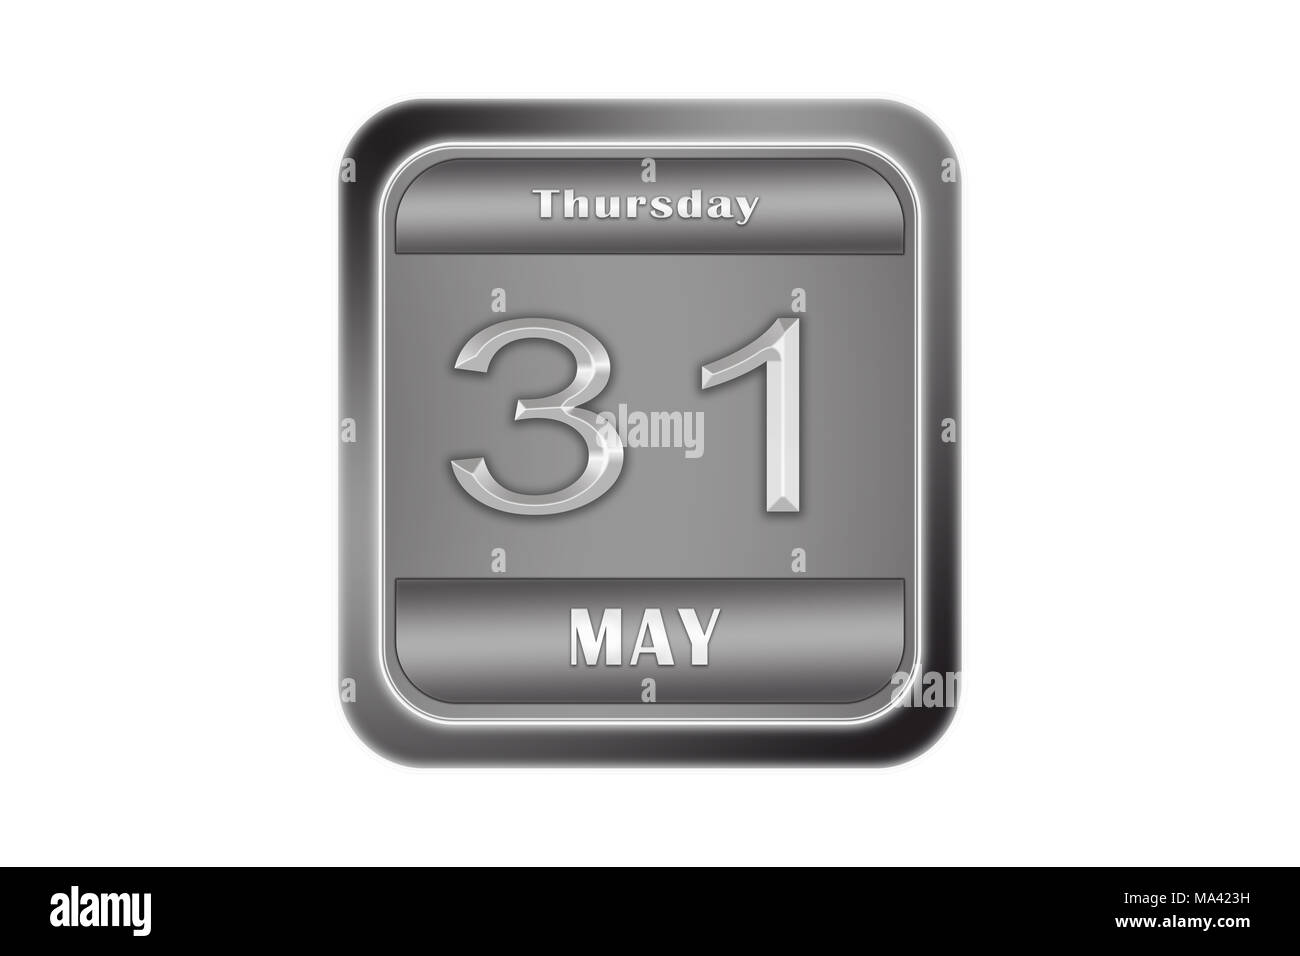 Date may 31, Thursday written on a metal plate Stock Photo